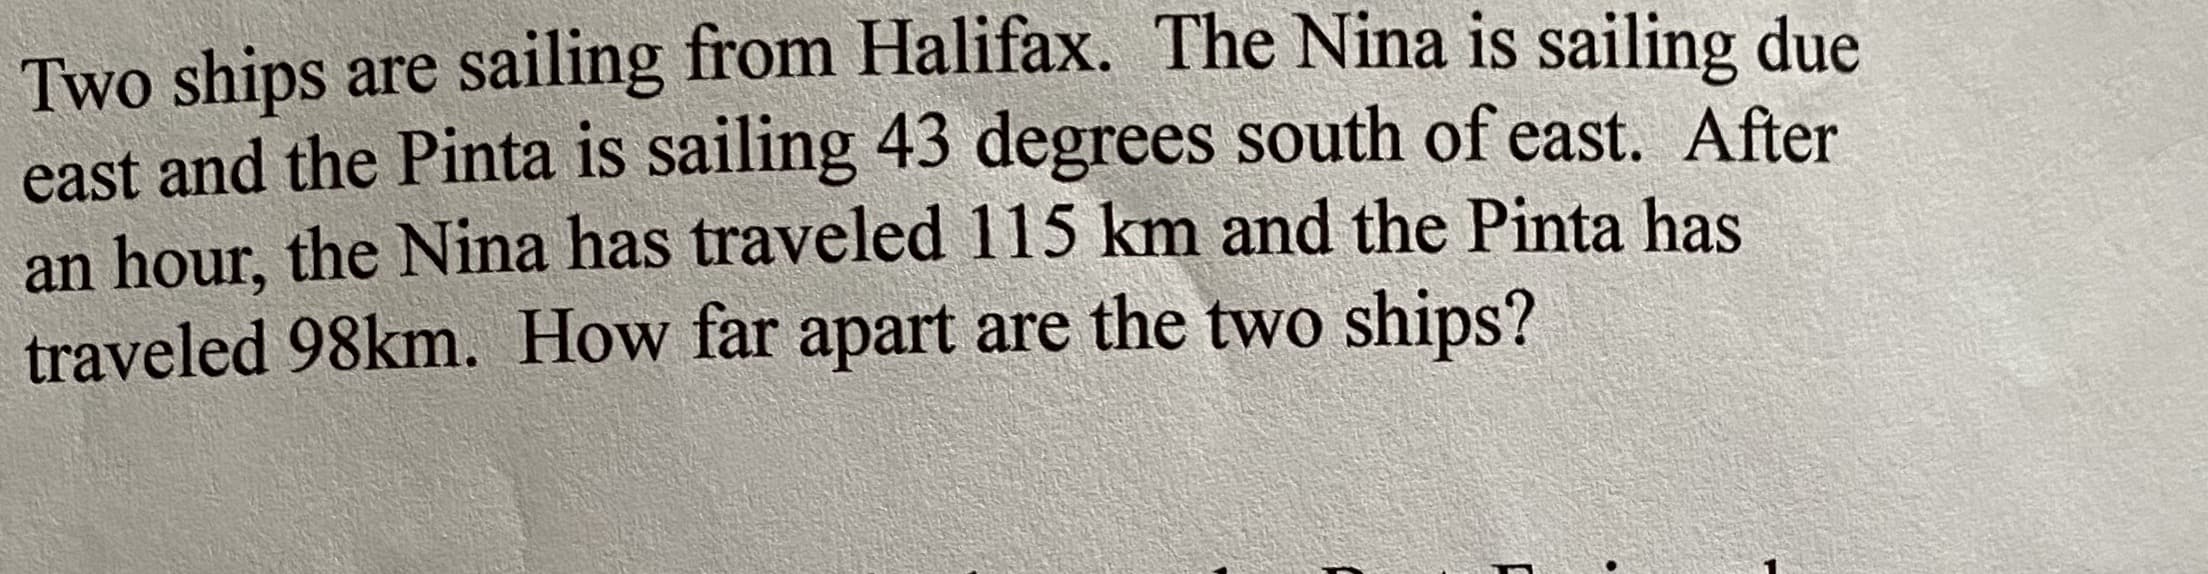 Two ships are sailing from Halifax. The Nina is sailing due
east and the Pinta is sailing 43 degrees south of east. After
an hour, the Nina has traveled 115 km and the Pinta has
traveled 98km. How far apart are the two ships?
